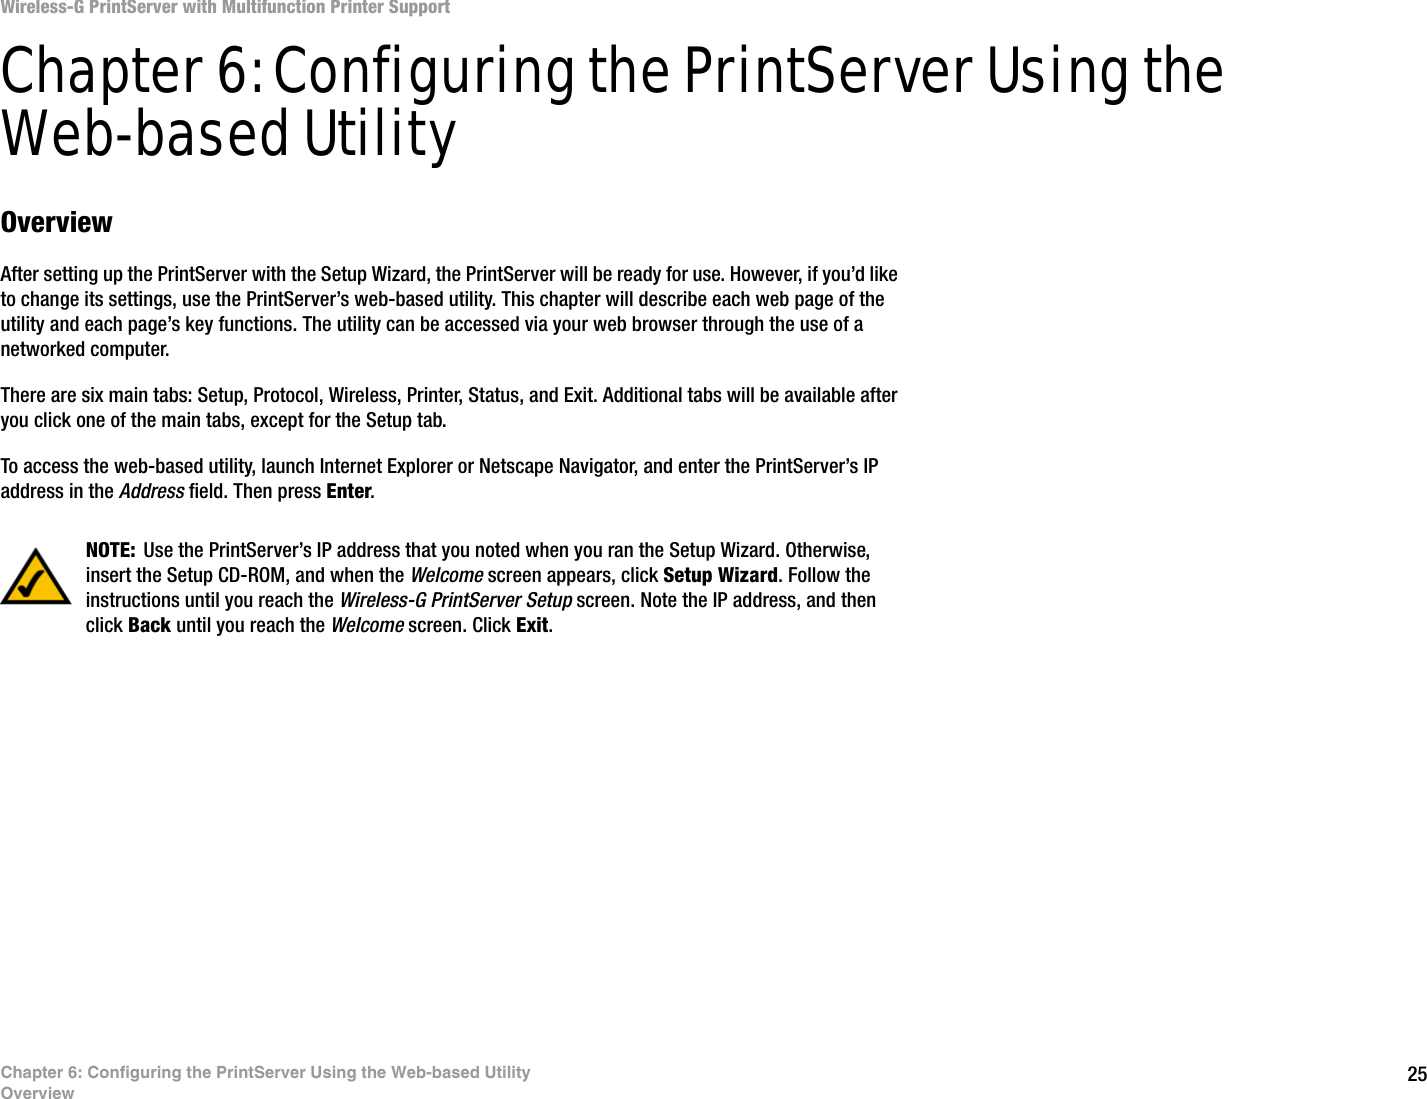 25Chapter 6: Configuring the PrintServer Using the Web-based UtilityOverviewWireless-G PrintServer with Multifunction Printer SupportChapter 6: Configuring the PrintServer Using the Web-based UtilityOverviewAfter setting up the PrintServer with the Setup Wizard, the PrintServer will be ready for use. However, if you’d like to change its settings, use the PrintServer’s web-based utility. This chapter will describe each web page of the utility and each page’s key functions. The utility can be accessed via your web browser through the use of a networked computer.There are six main tabs: Setup, Protocol, Wireless, Printer, Status, and Exit. Additional tabs will be available after you click one of the main tabs, except for the Setup tab.To access the web-based utility, launch Internet Explorer or Netscape Navigator, and enter the PrintServer’s IP address in the Address field. Then press Enter.NOTE: Use the PrintServer’s IP address that you noted when you ran the Setup Wizard. Otherwise, insert the Setup CD-ROM, and when the Welcome screen appears, click Setup Wizard. Follow the instructions until you reach the Wireless-G PrintServer Setup screen. Note the IP address, and then click Back until you reach the Welcome screen. Click Exit.